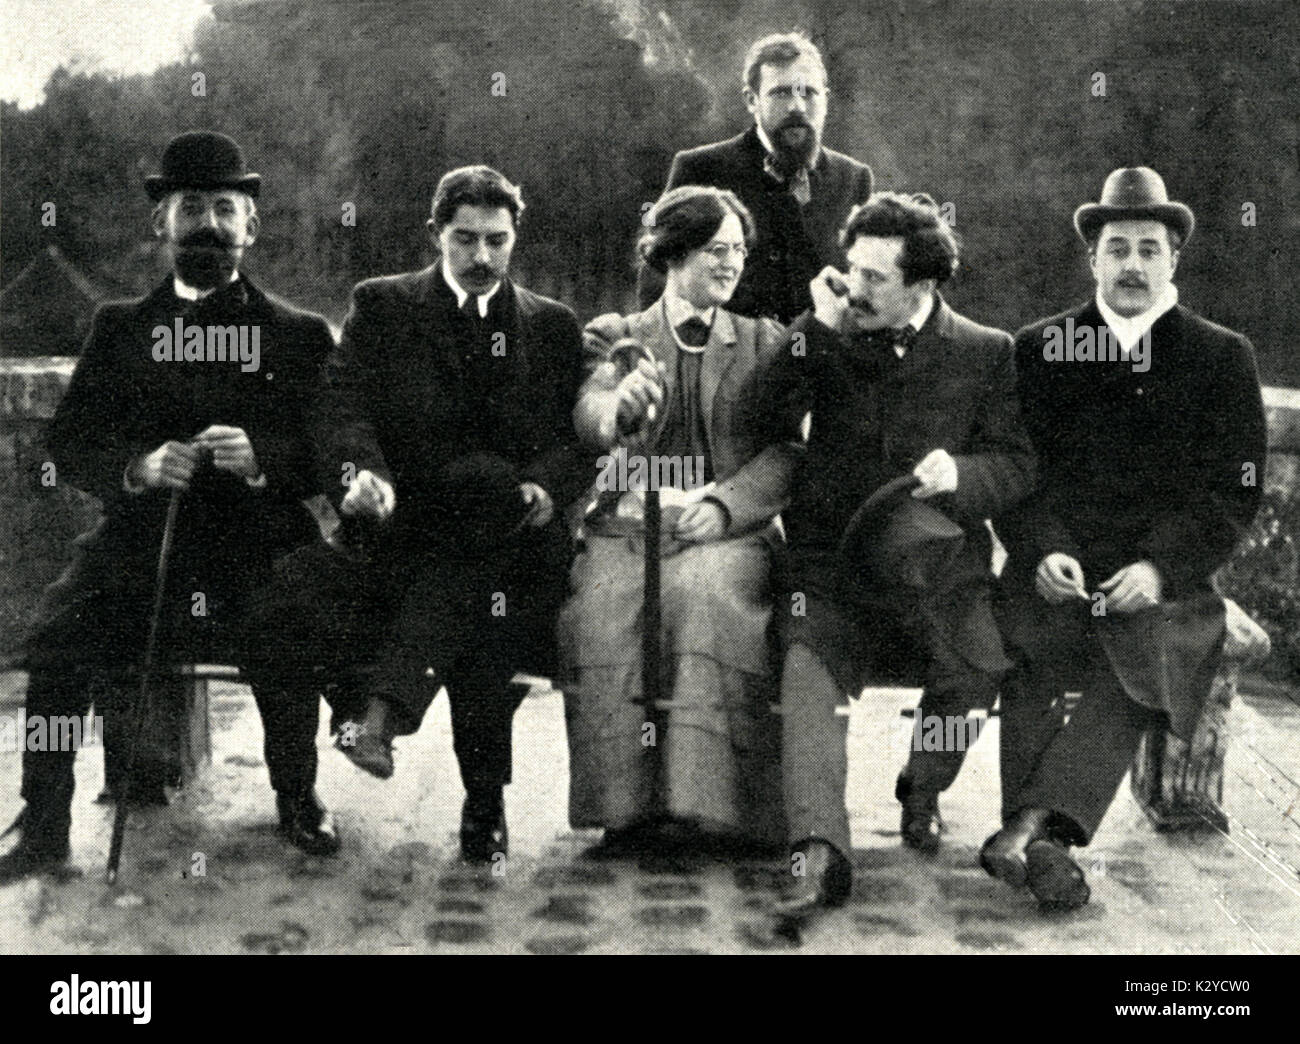 Nadia Boulanger with competitors for Grand Prix de Rome, 1907  (From July Musica, 1907)  L-R: Leboucher, Masselier, Boulanger, Gaubert, Delmas, Gailhard. French Composer and Teacher (1887-1979). Stock Photo